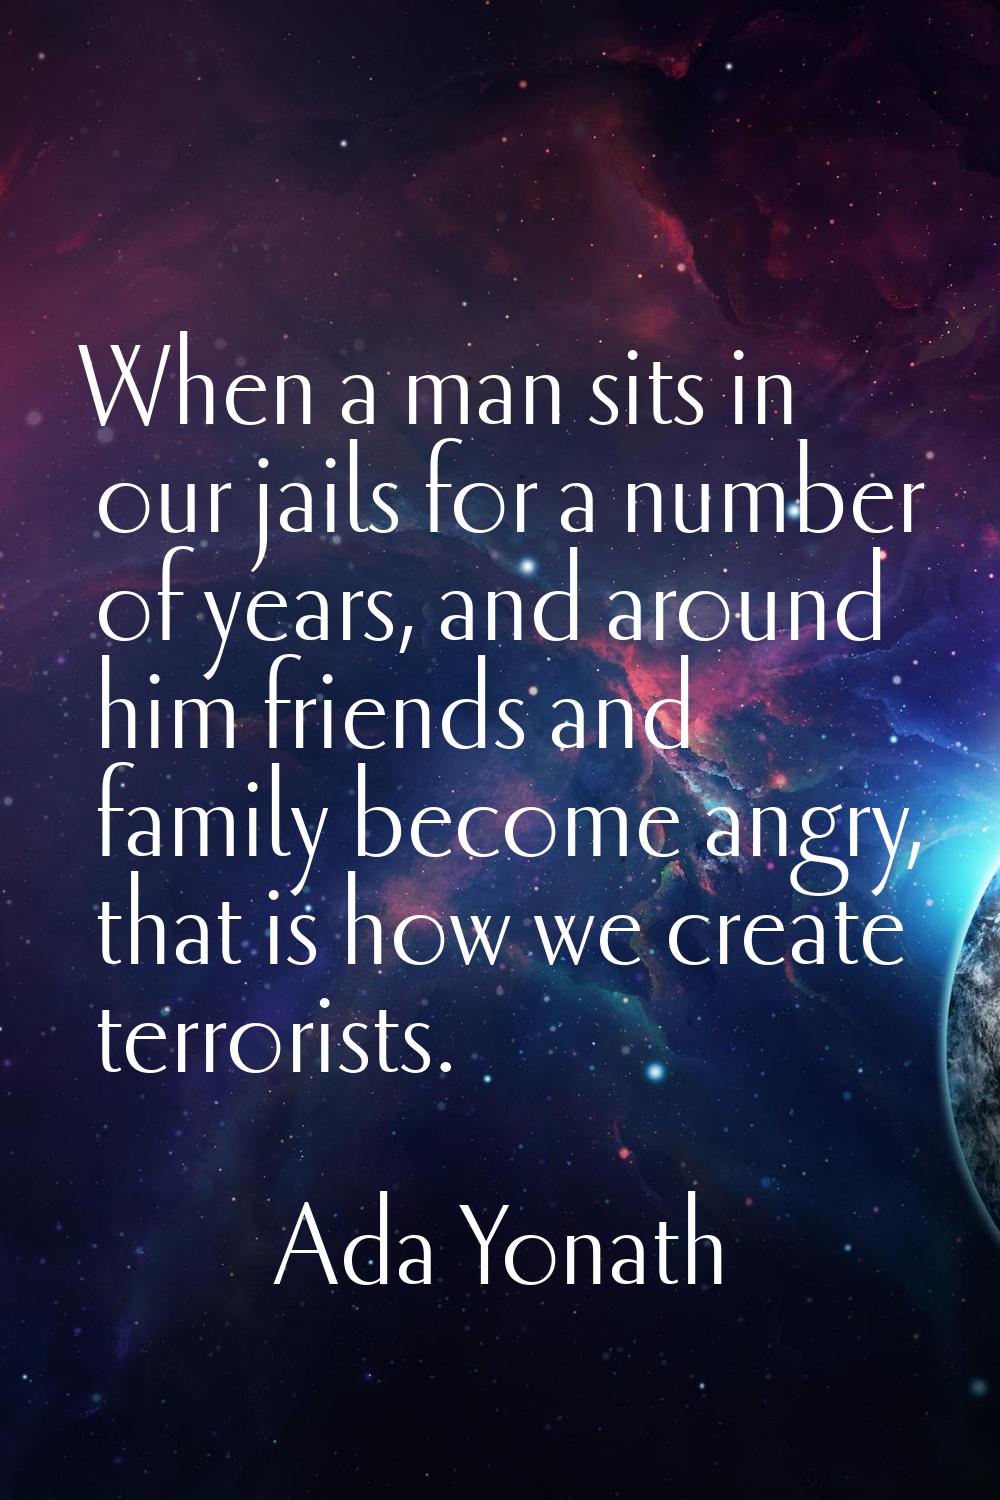 When a man sits in our jails for a number of years, and around him friends and family become angry,